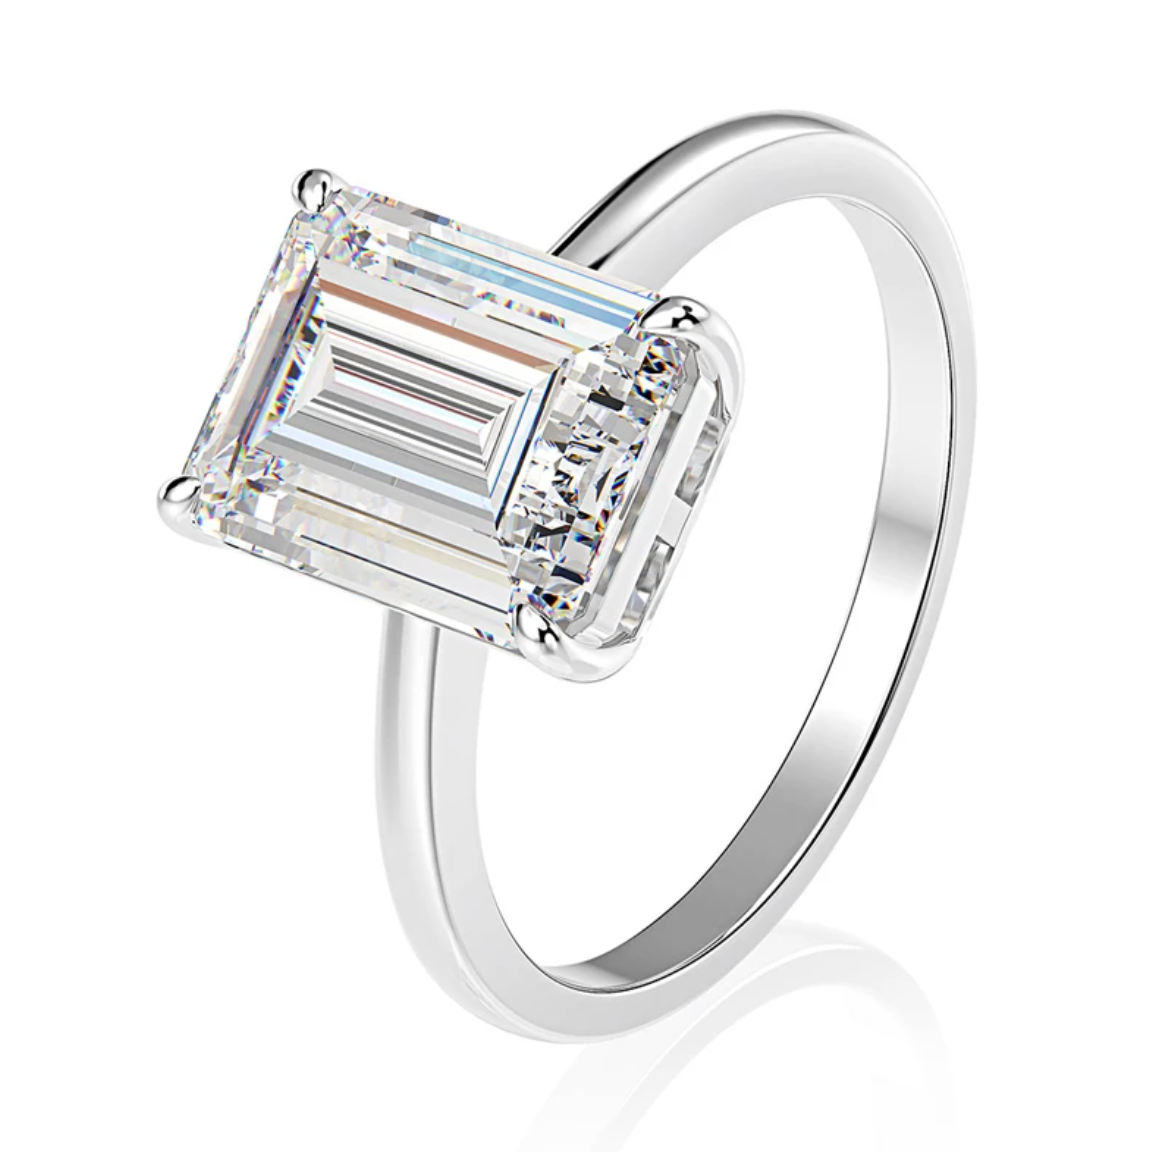 Amal Clooney Emerald Cut Engagement Ring on Sterling Silver band by Margalit Rings